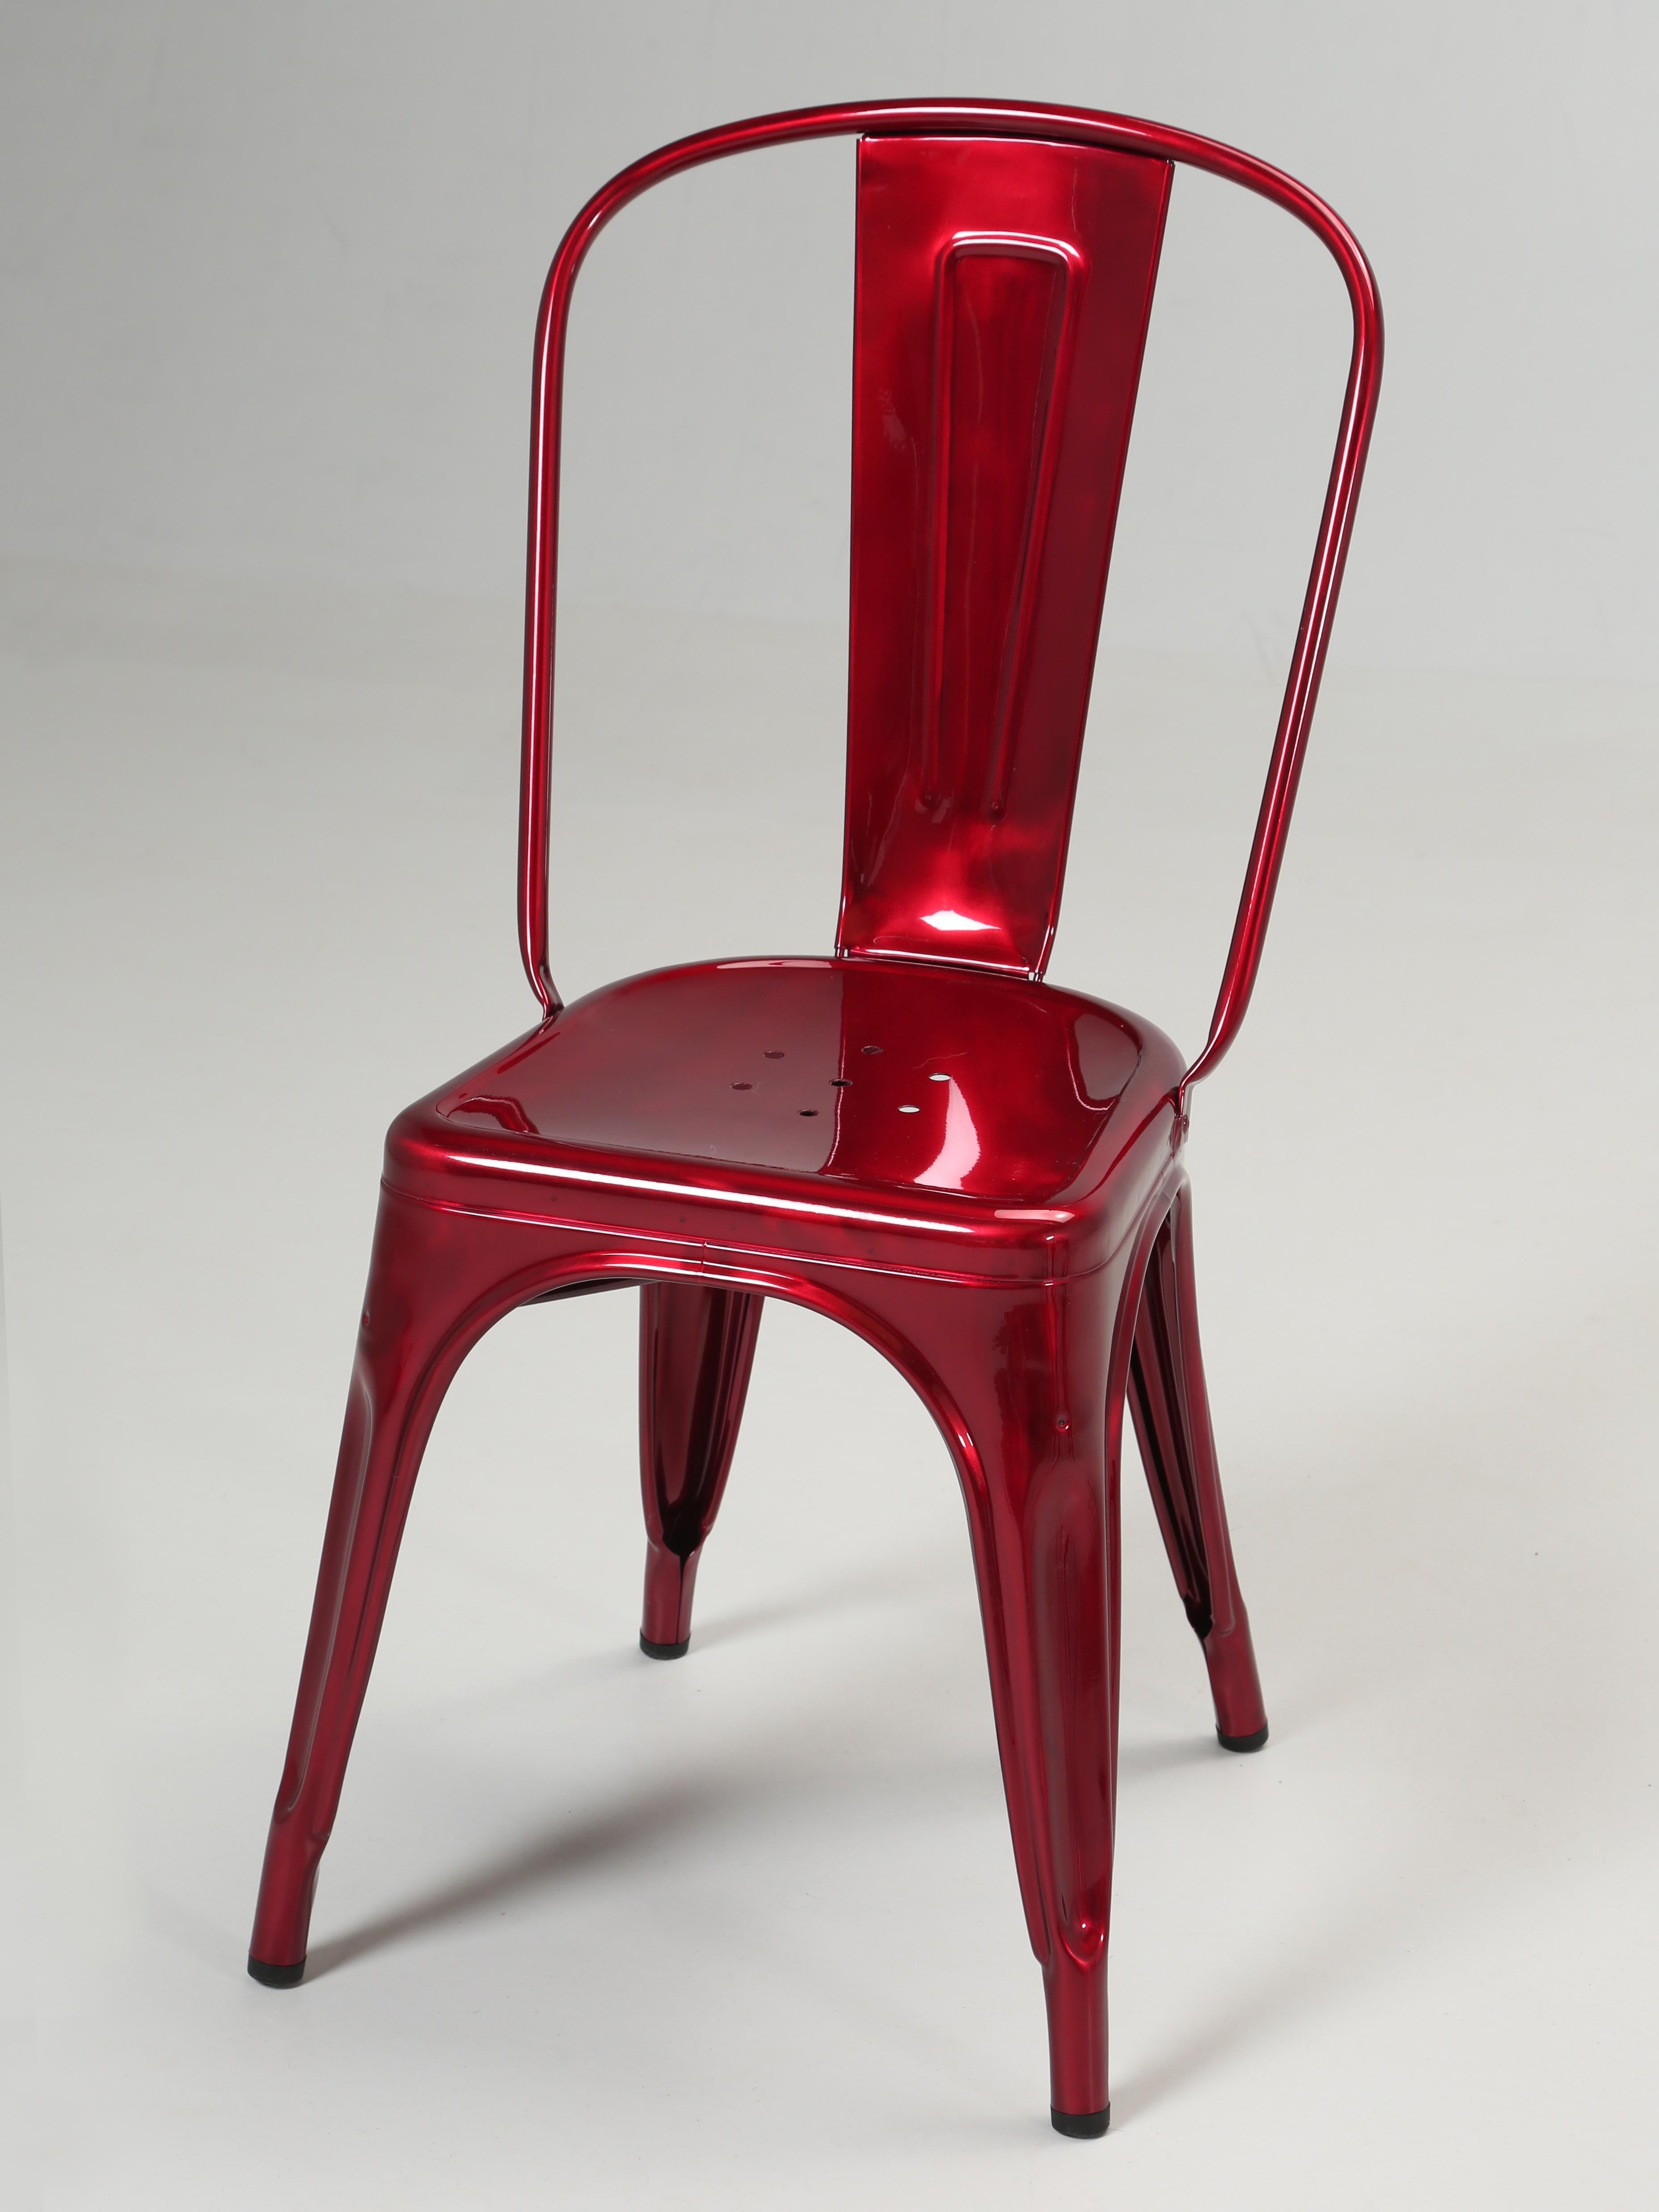 French Tolix Set of (4) Steel Stacking Chairs in a Brilliant Candy Apple Red Metallic